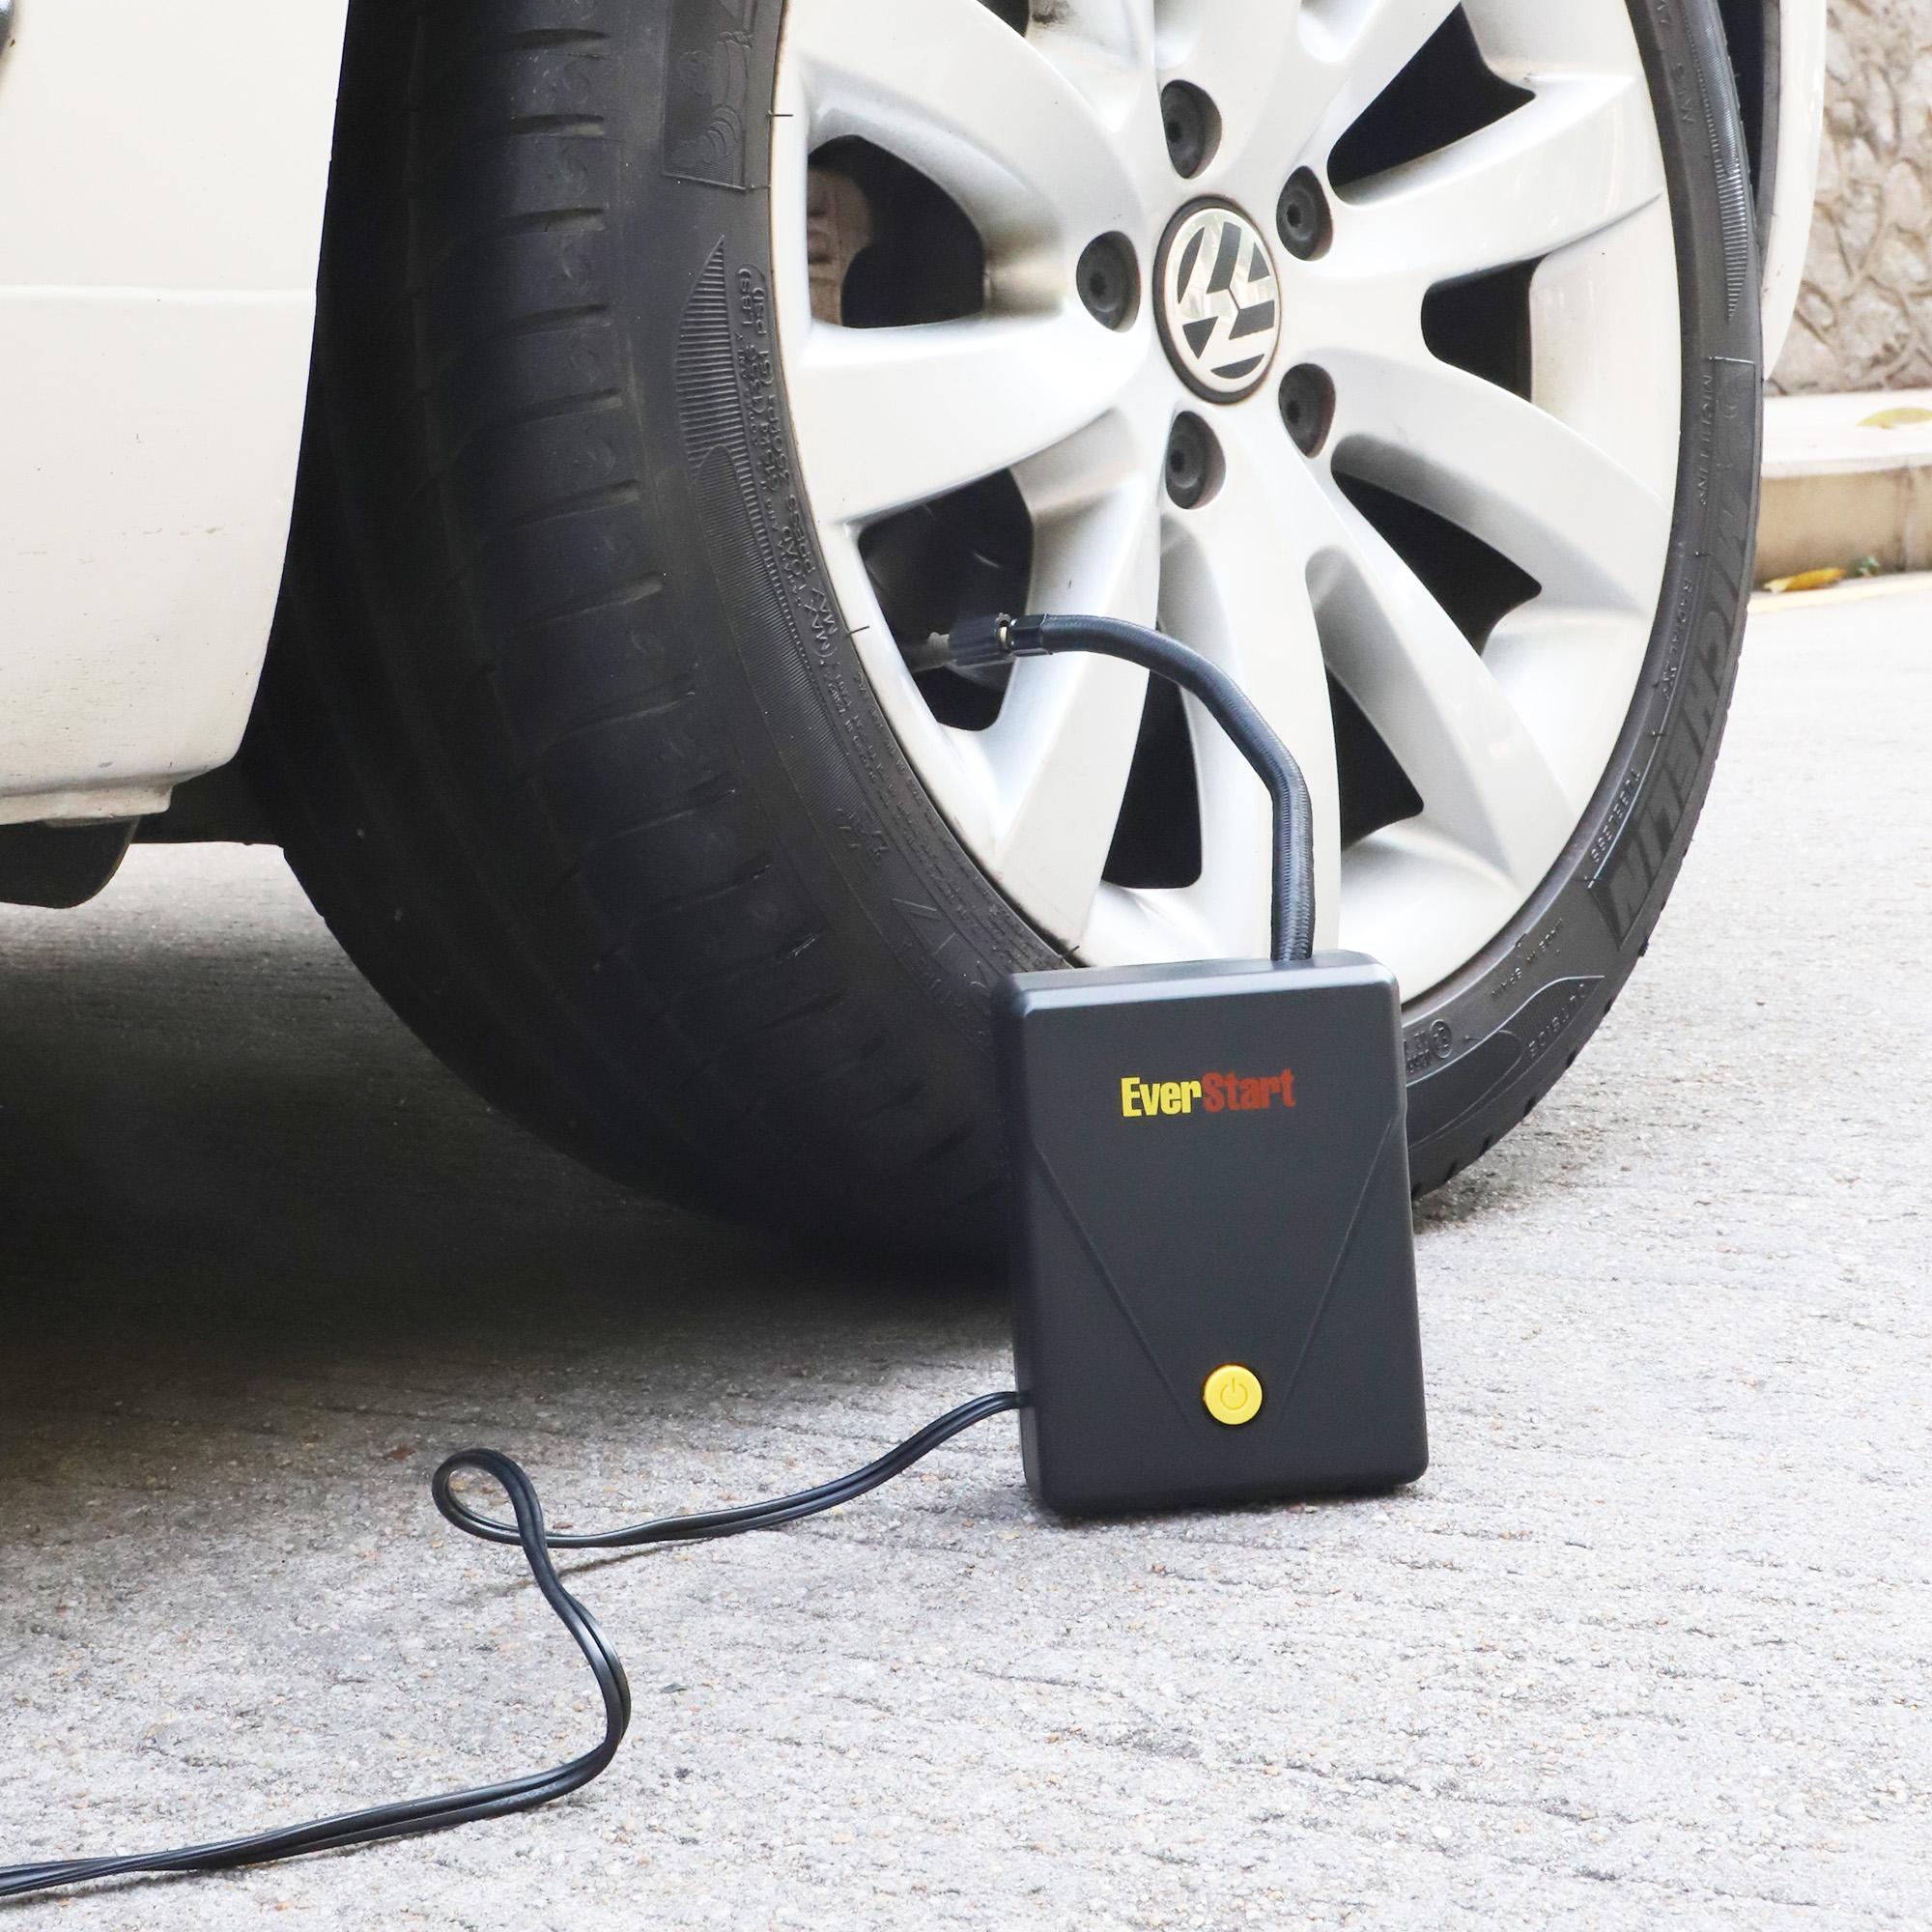 EverStart Roadside Safety Kit with Tire Inflator. Assembled Product Dimensions: 10in x 3in x 8in - image 5 of 11